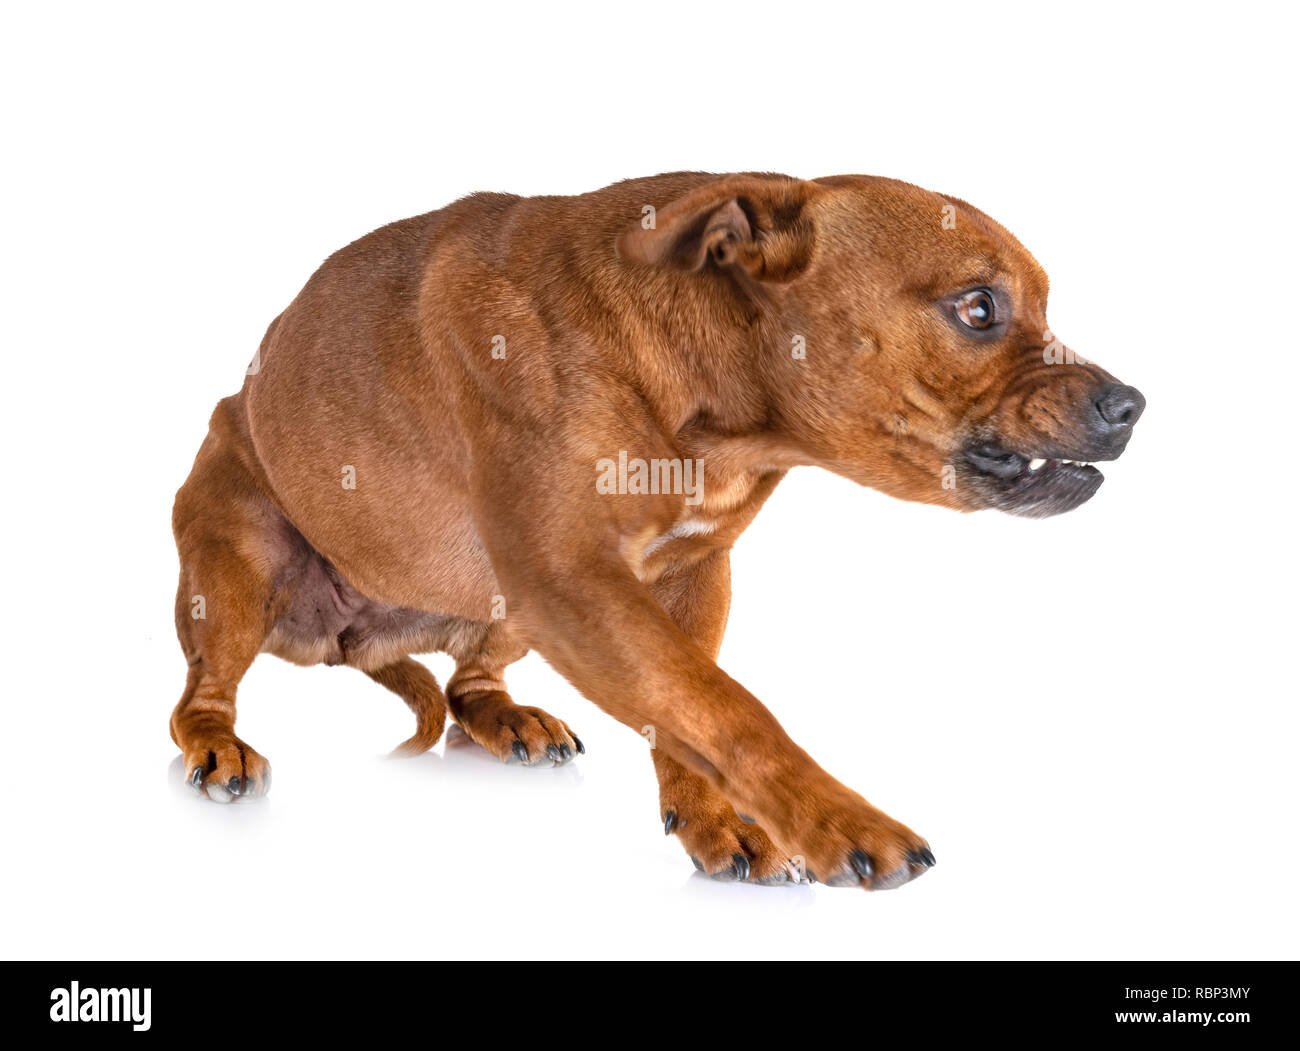 Staffordshire Bull Terrier in front of white background Banque D'Images